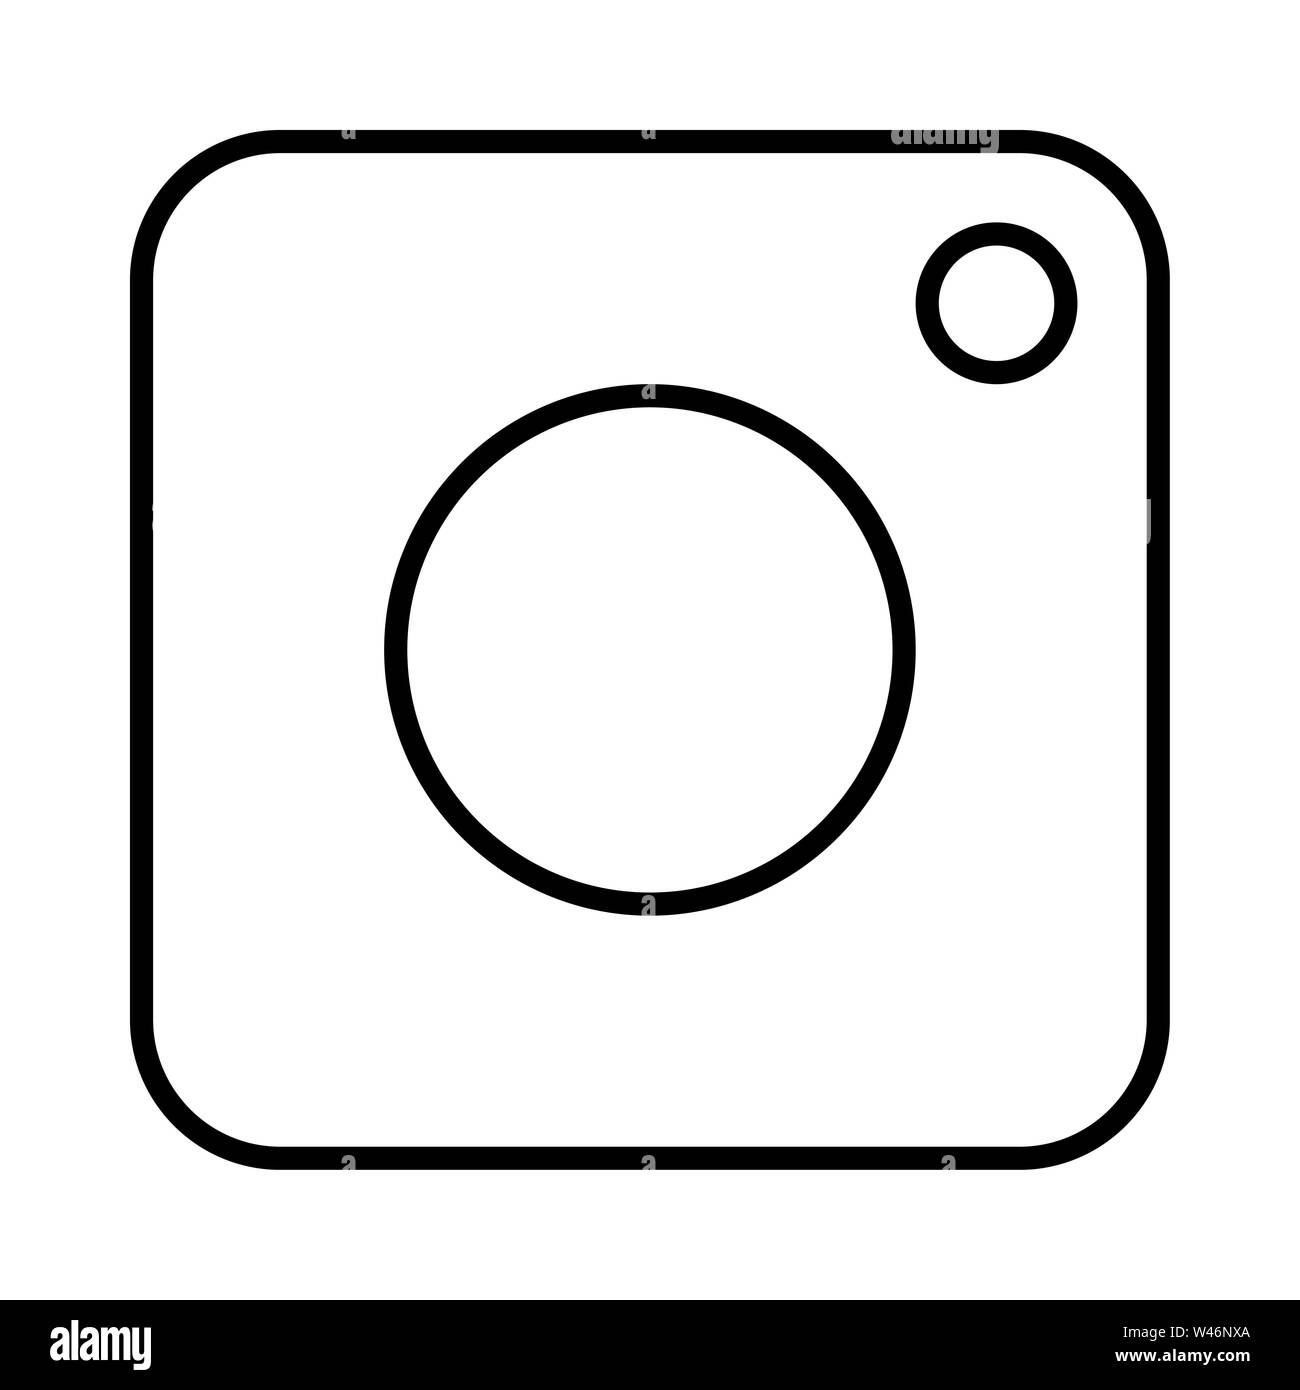 Social media Instagram Camera Icon or Logo Illustration. Social media sign isolated on white background. Simple vector illustration for graphic and we Stock Photo